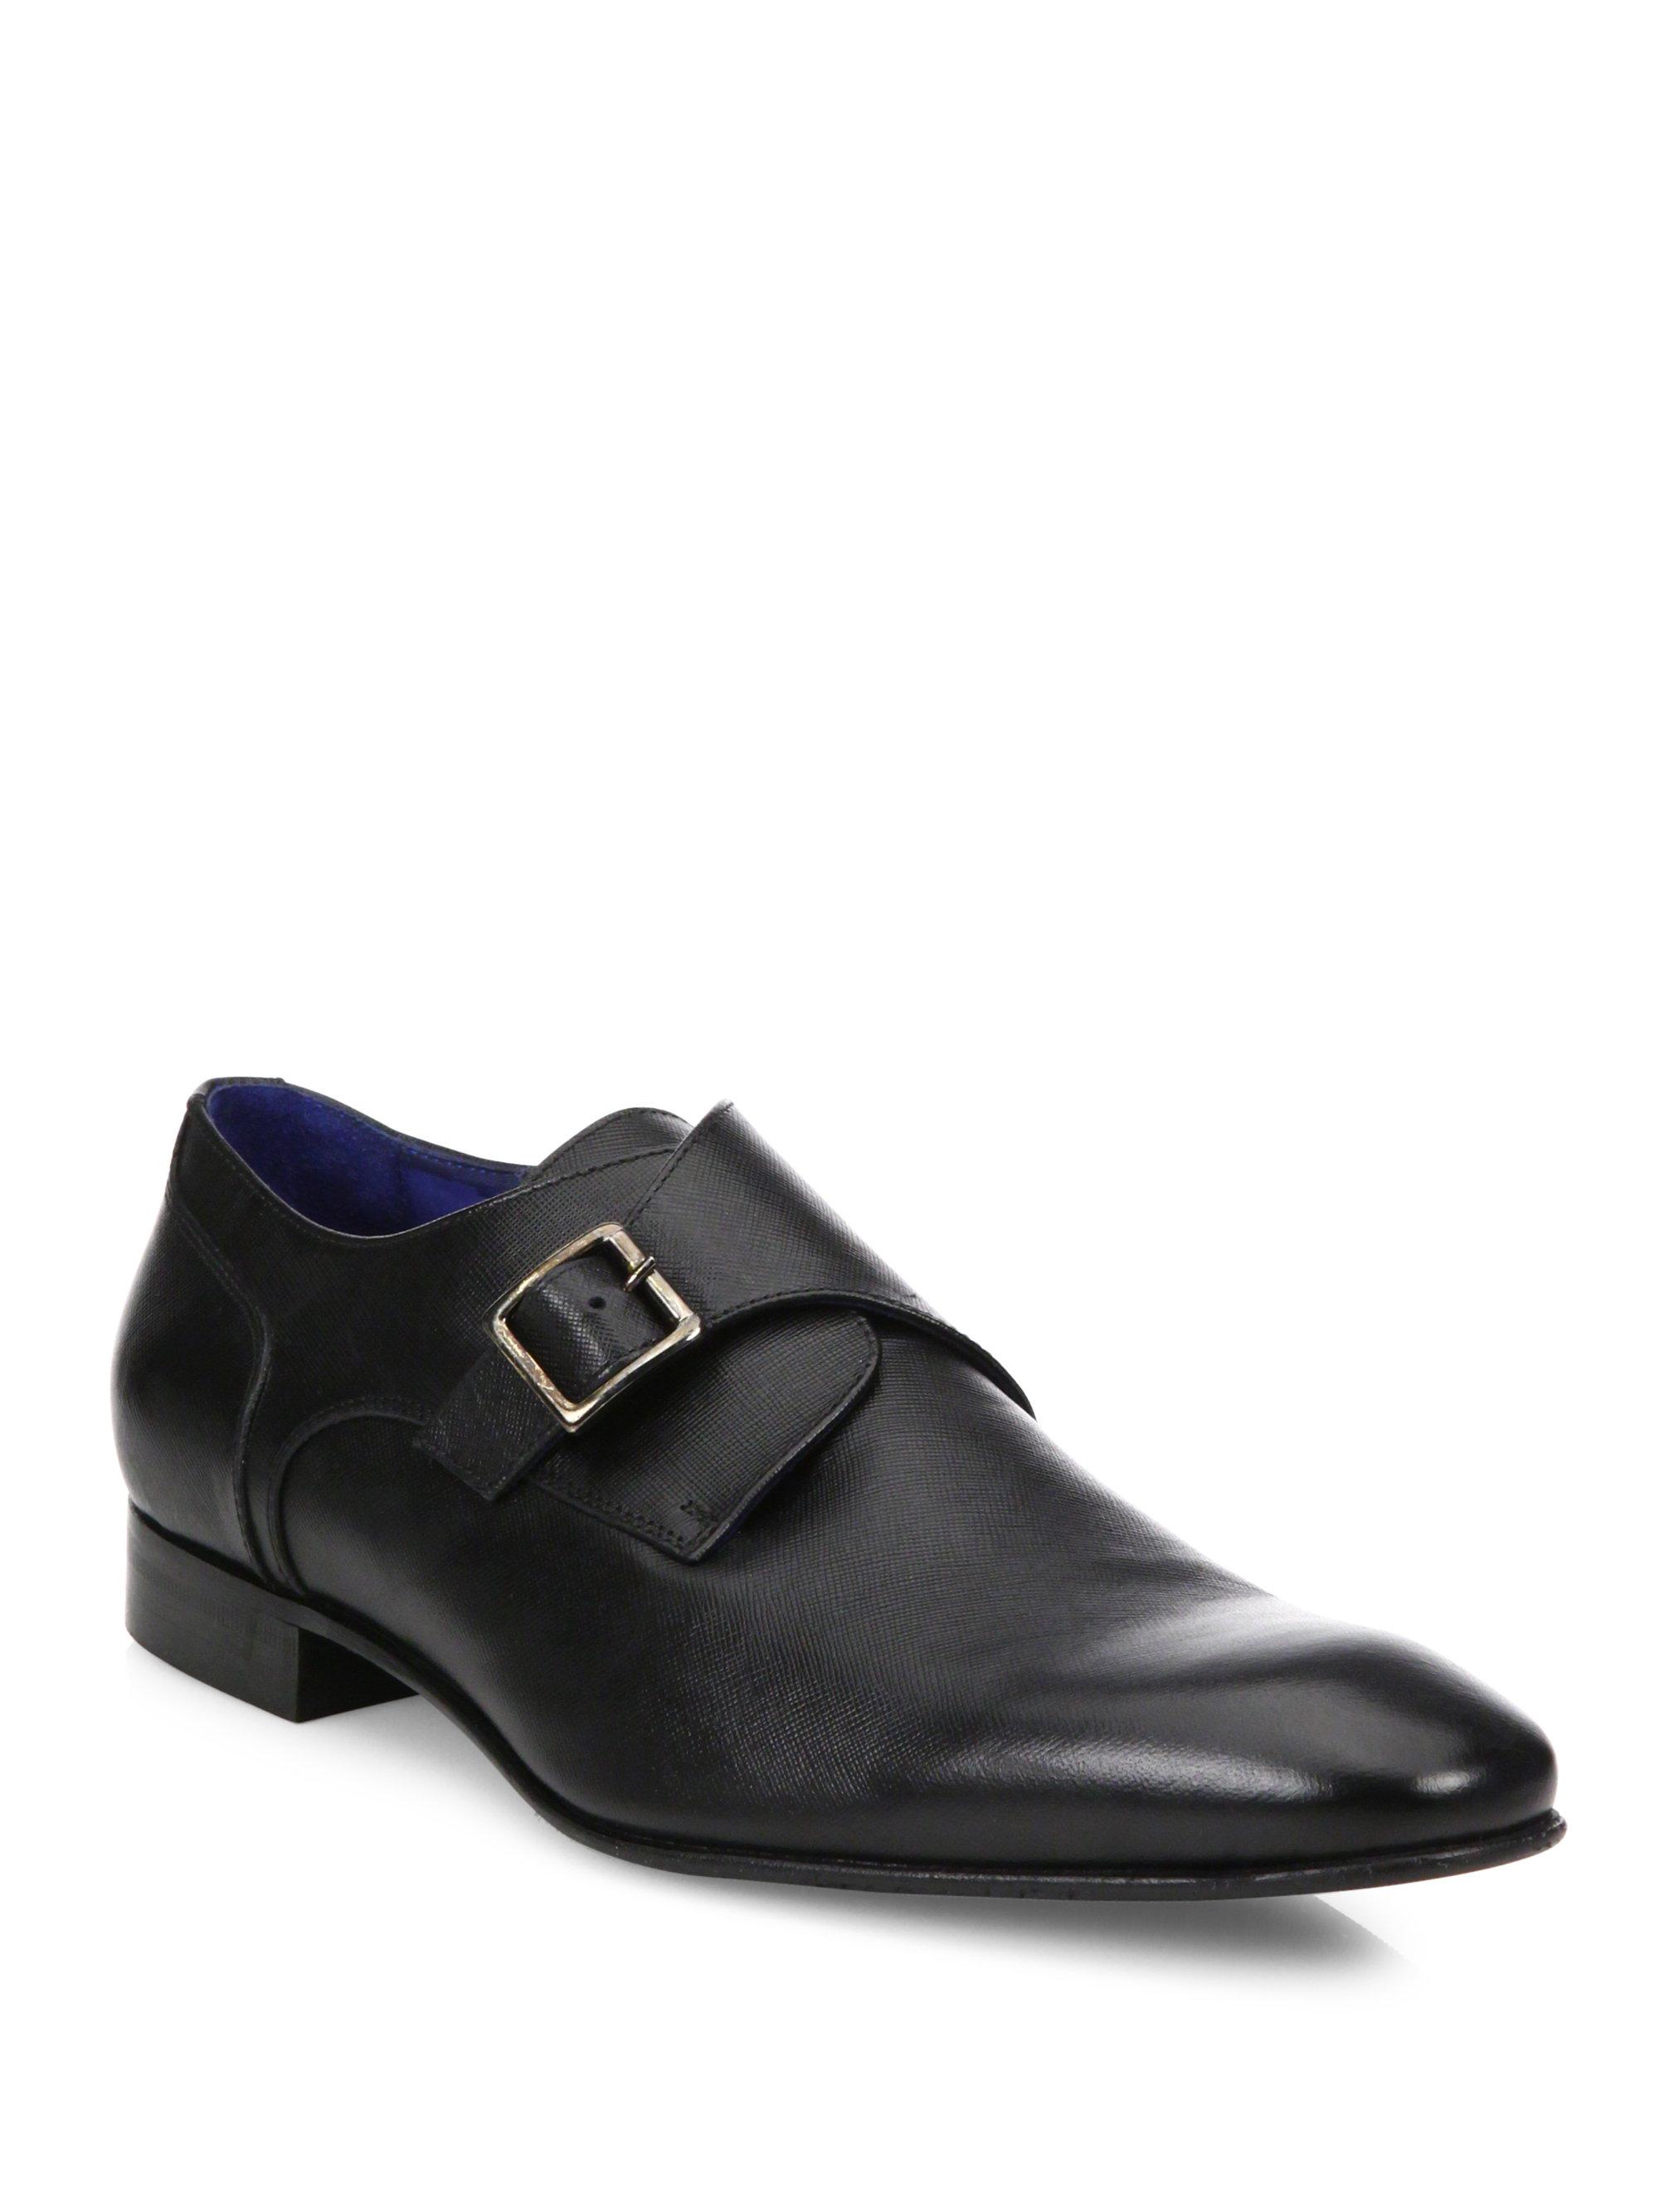 Lyst - Saks Fifth Avenue Saffiano Leather Monkstrap Shoes in Black for Men